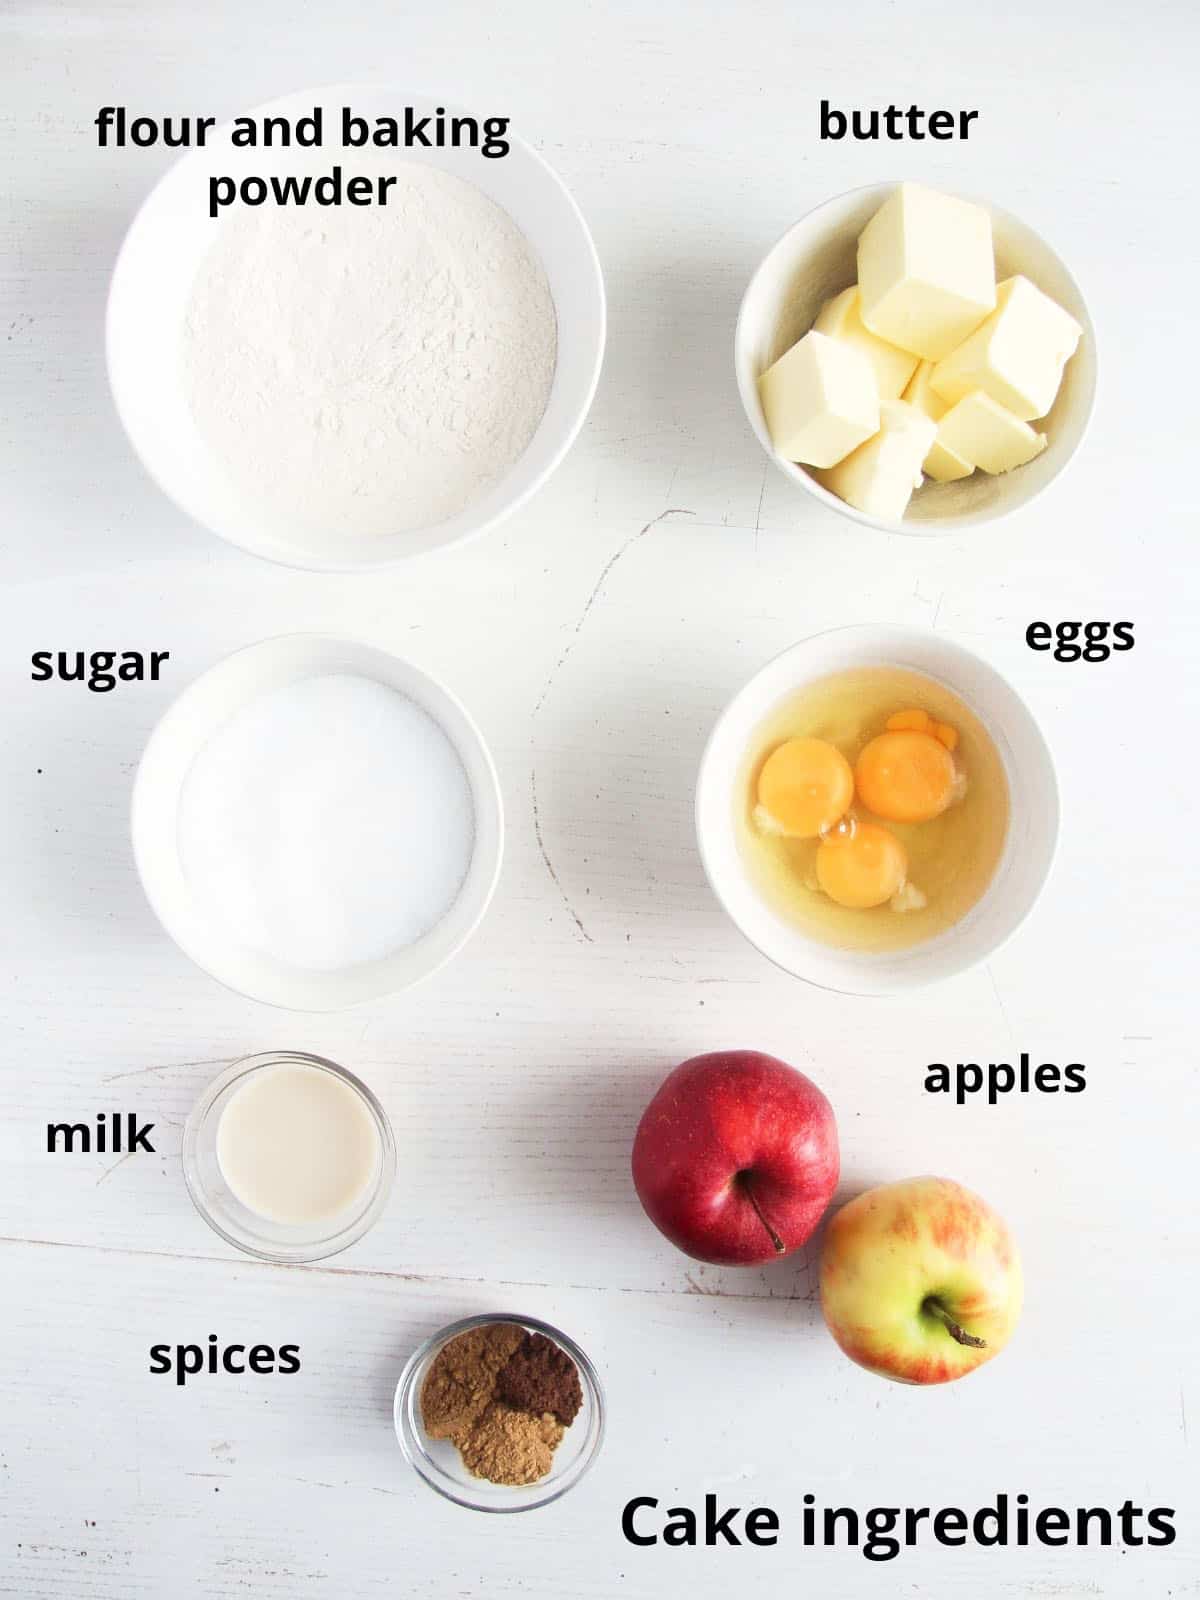 labeled ingredients needed for spicy apple cake.